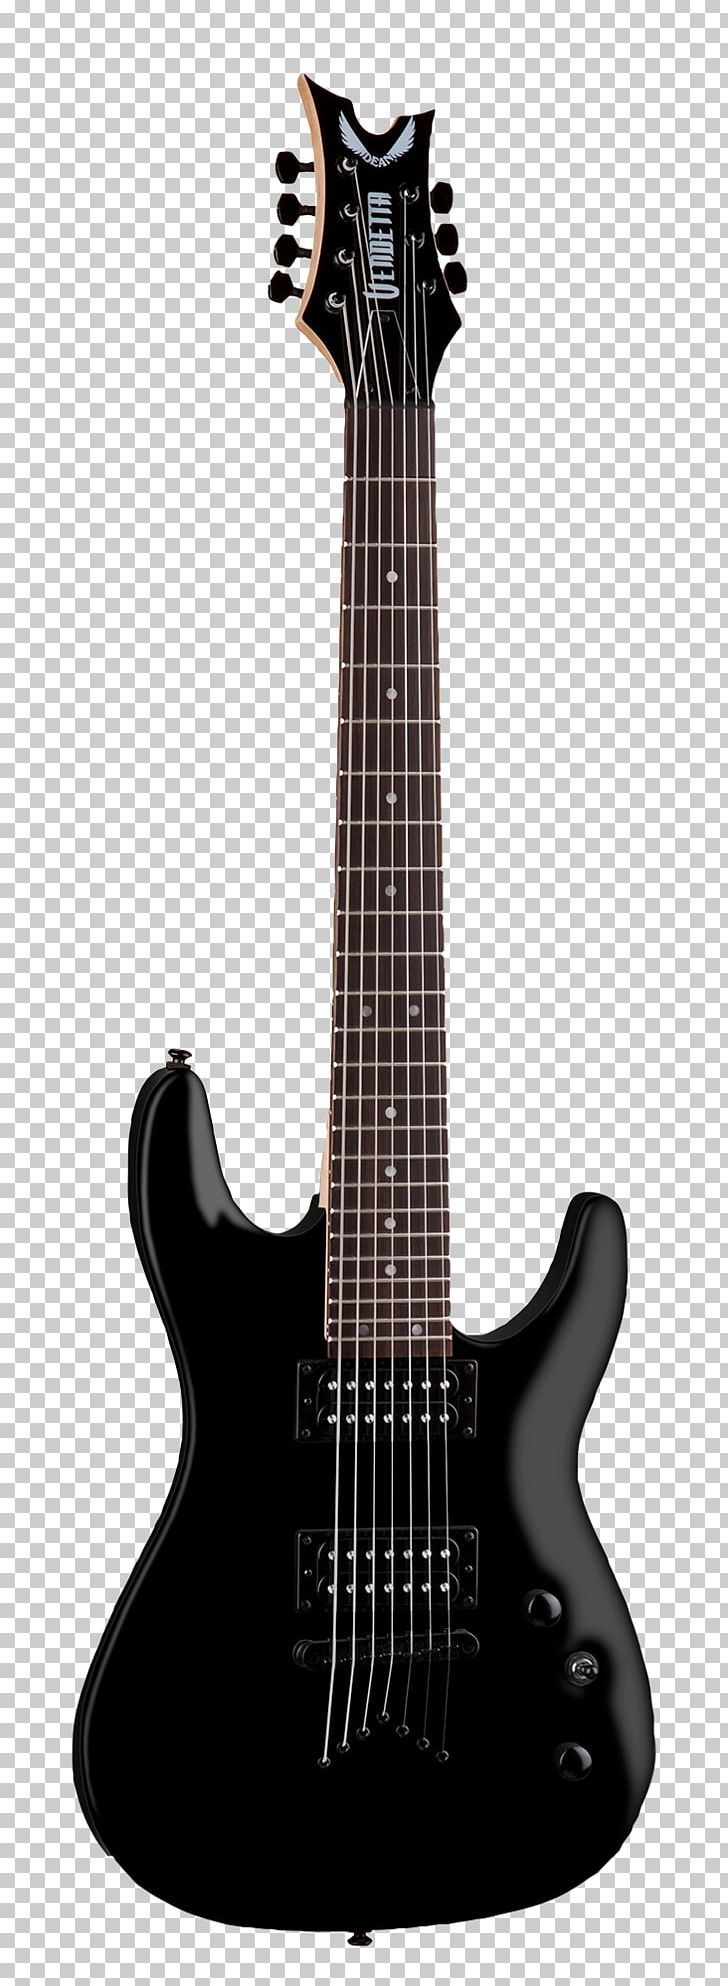 Dean Vendetta XM Electric Guitar Dean Guitars Musical Instruments PNG, Clipart, Acoustic Electric Guitar, Musical Instrument, Musical Instruments, Objects, Plucked String Instruments Free PNG Download